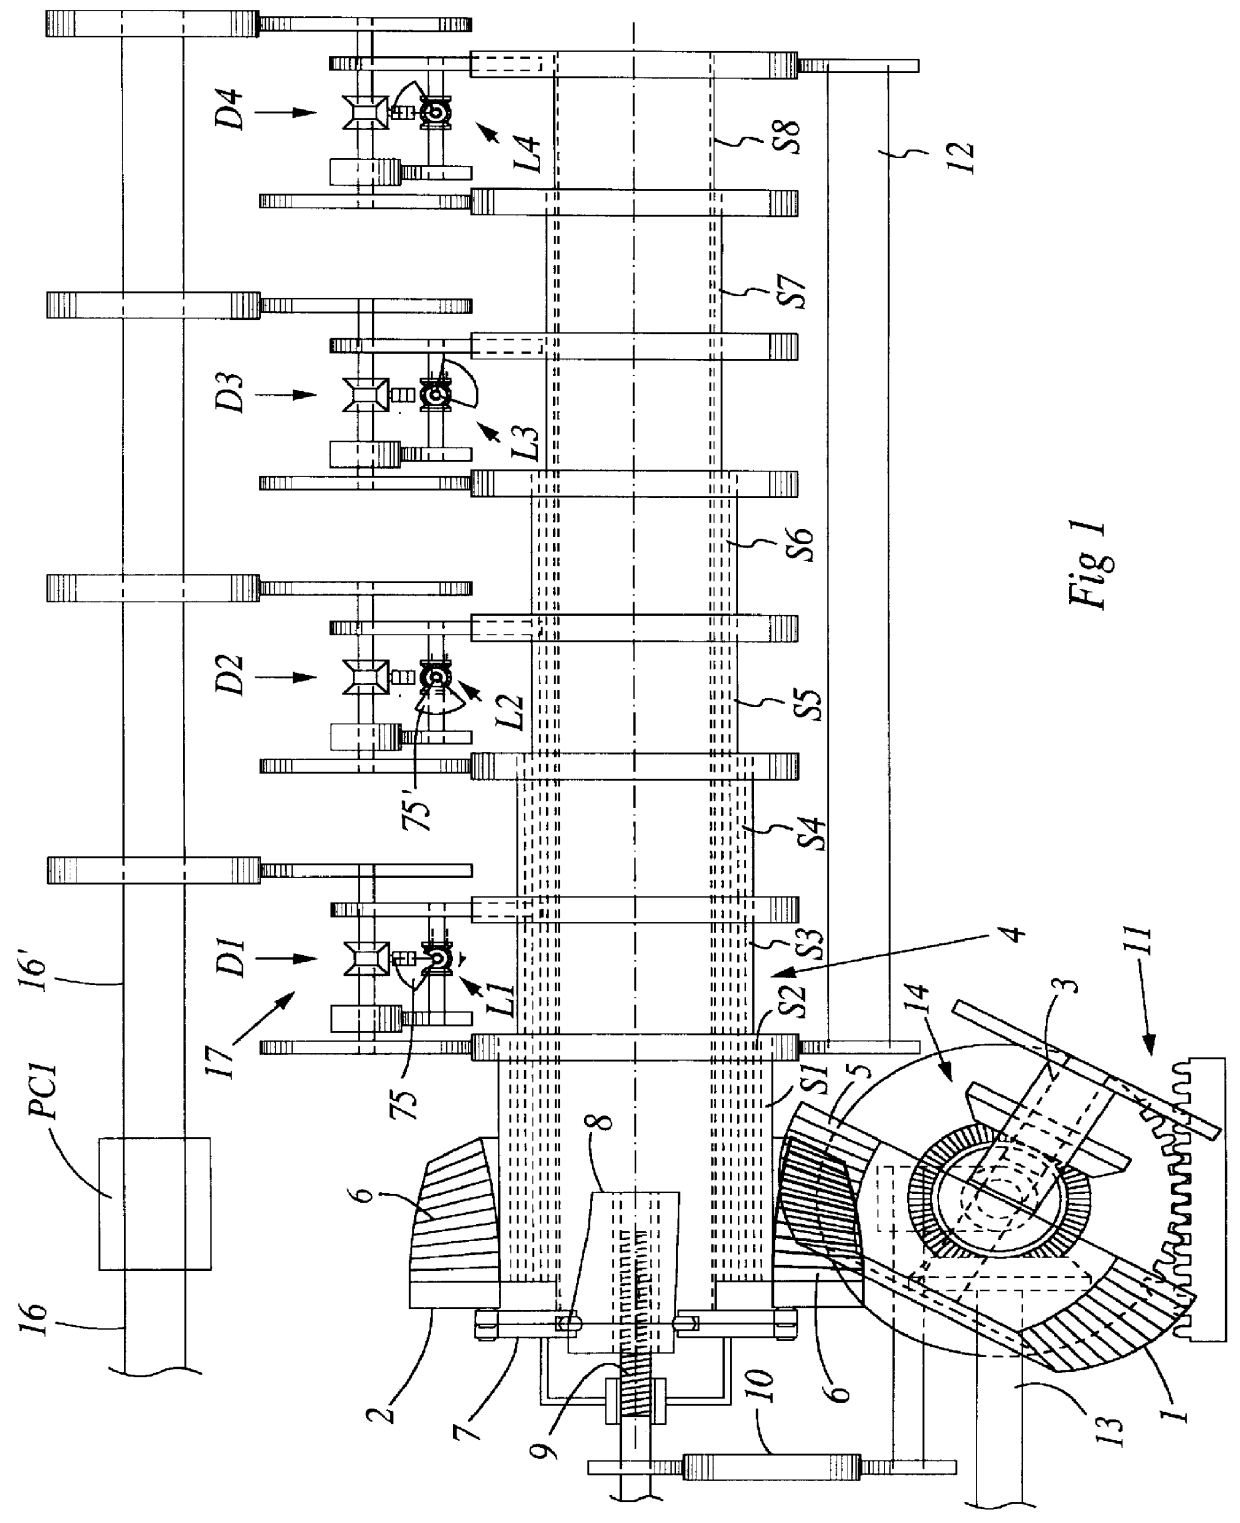 Continuously variable gear transmission